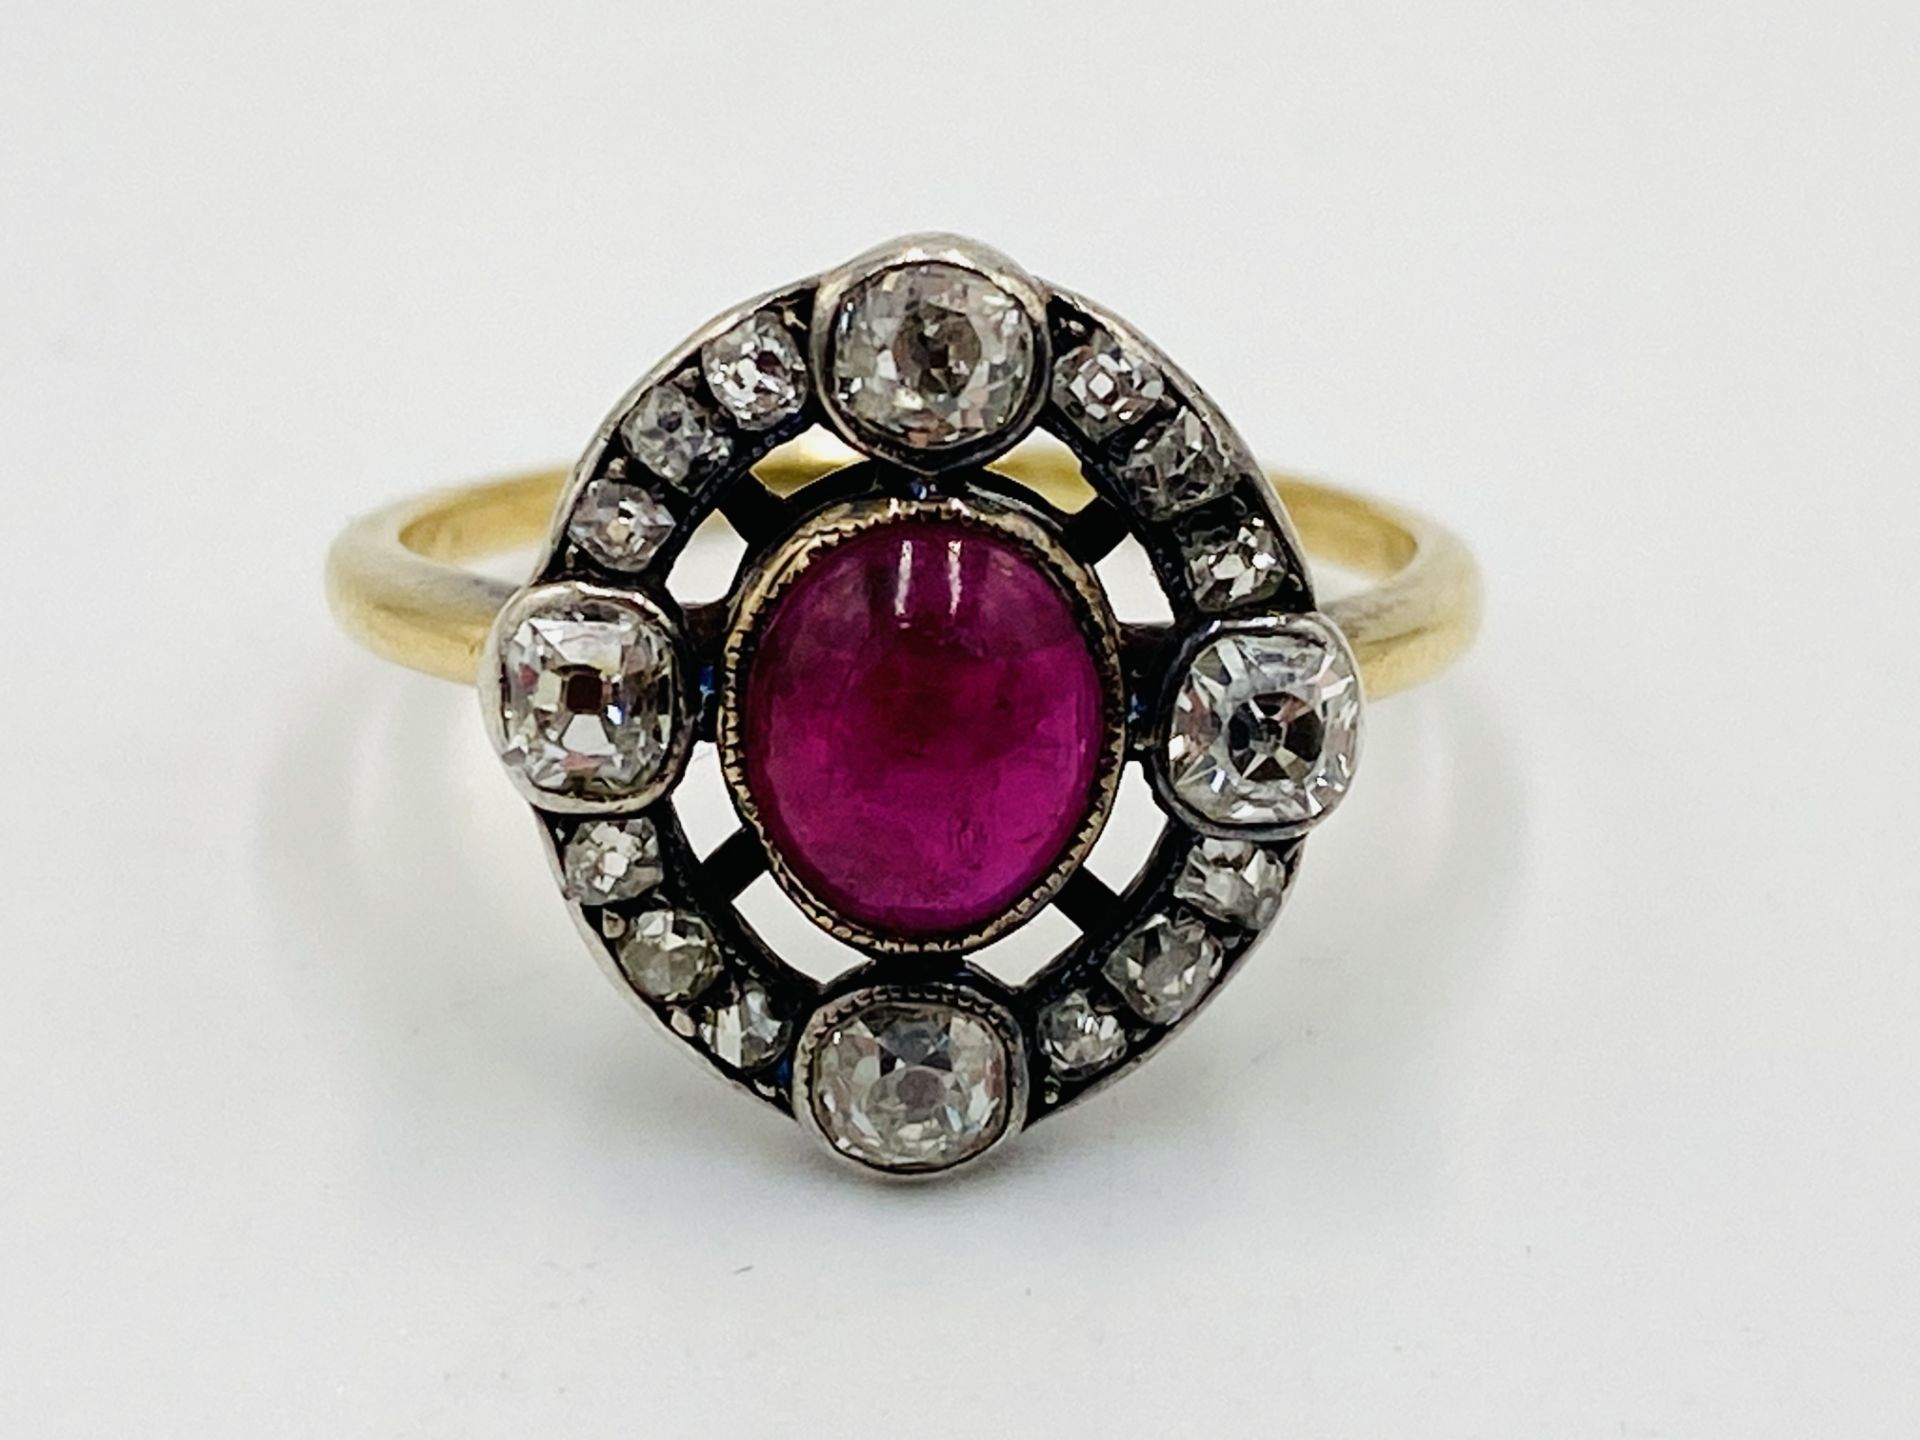 Gold ring set with a centre ruby and diamond surround